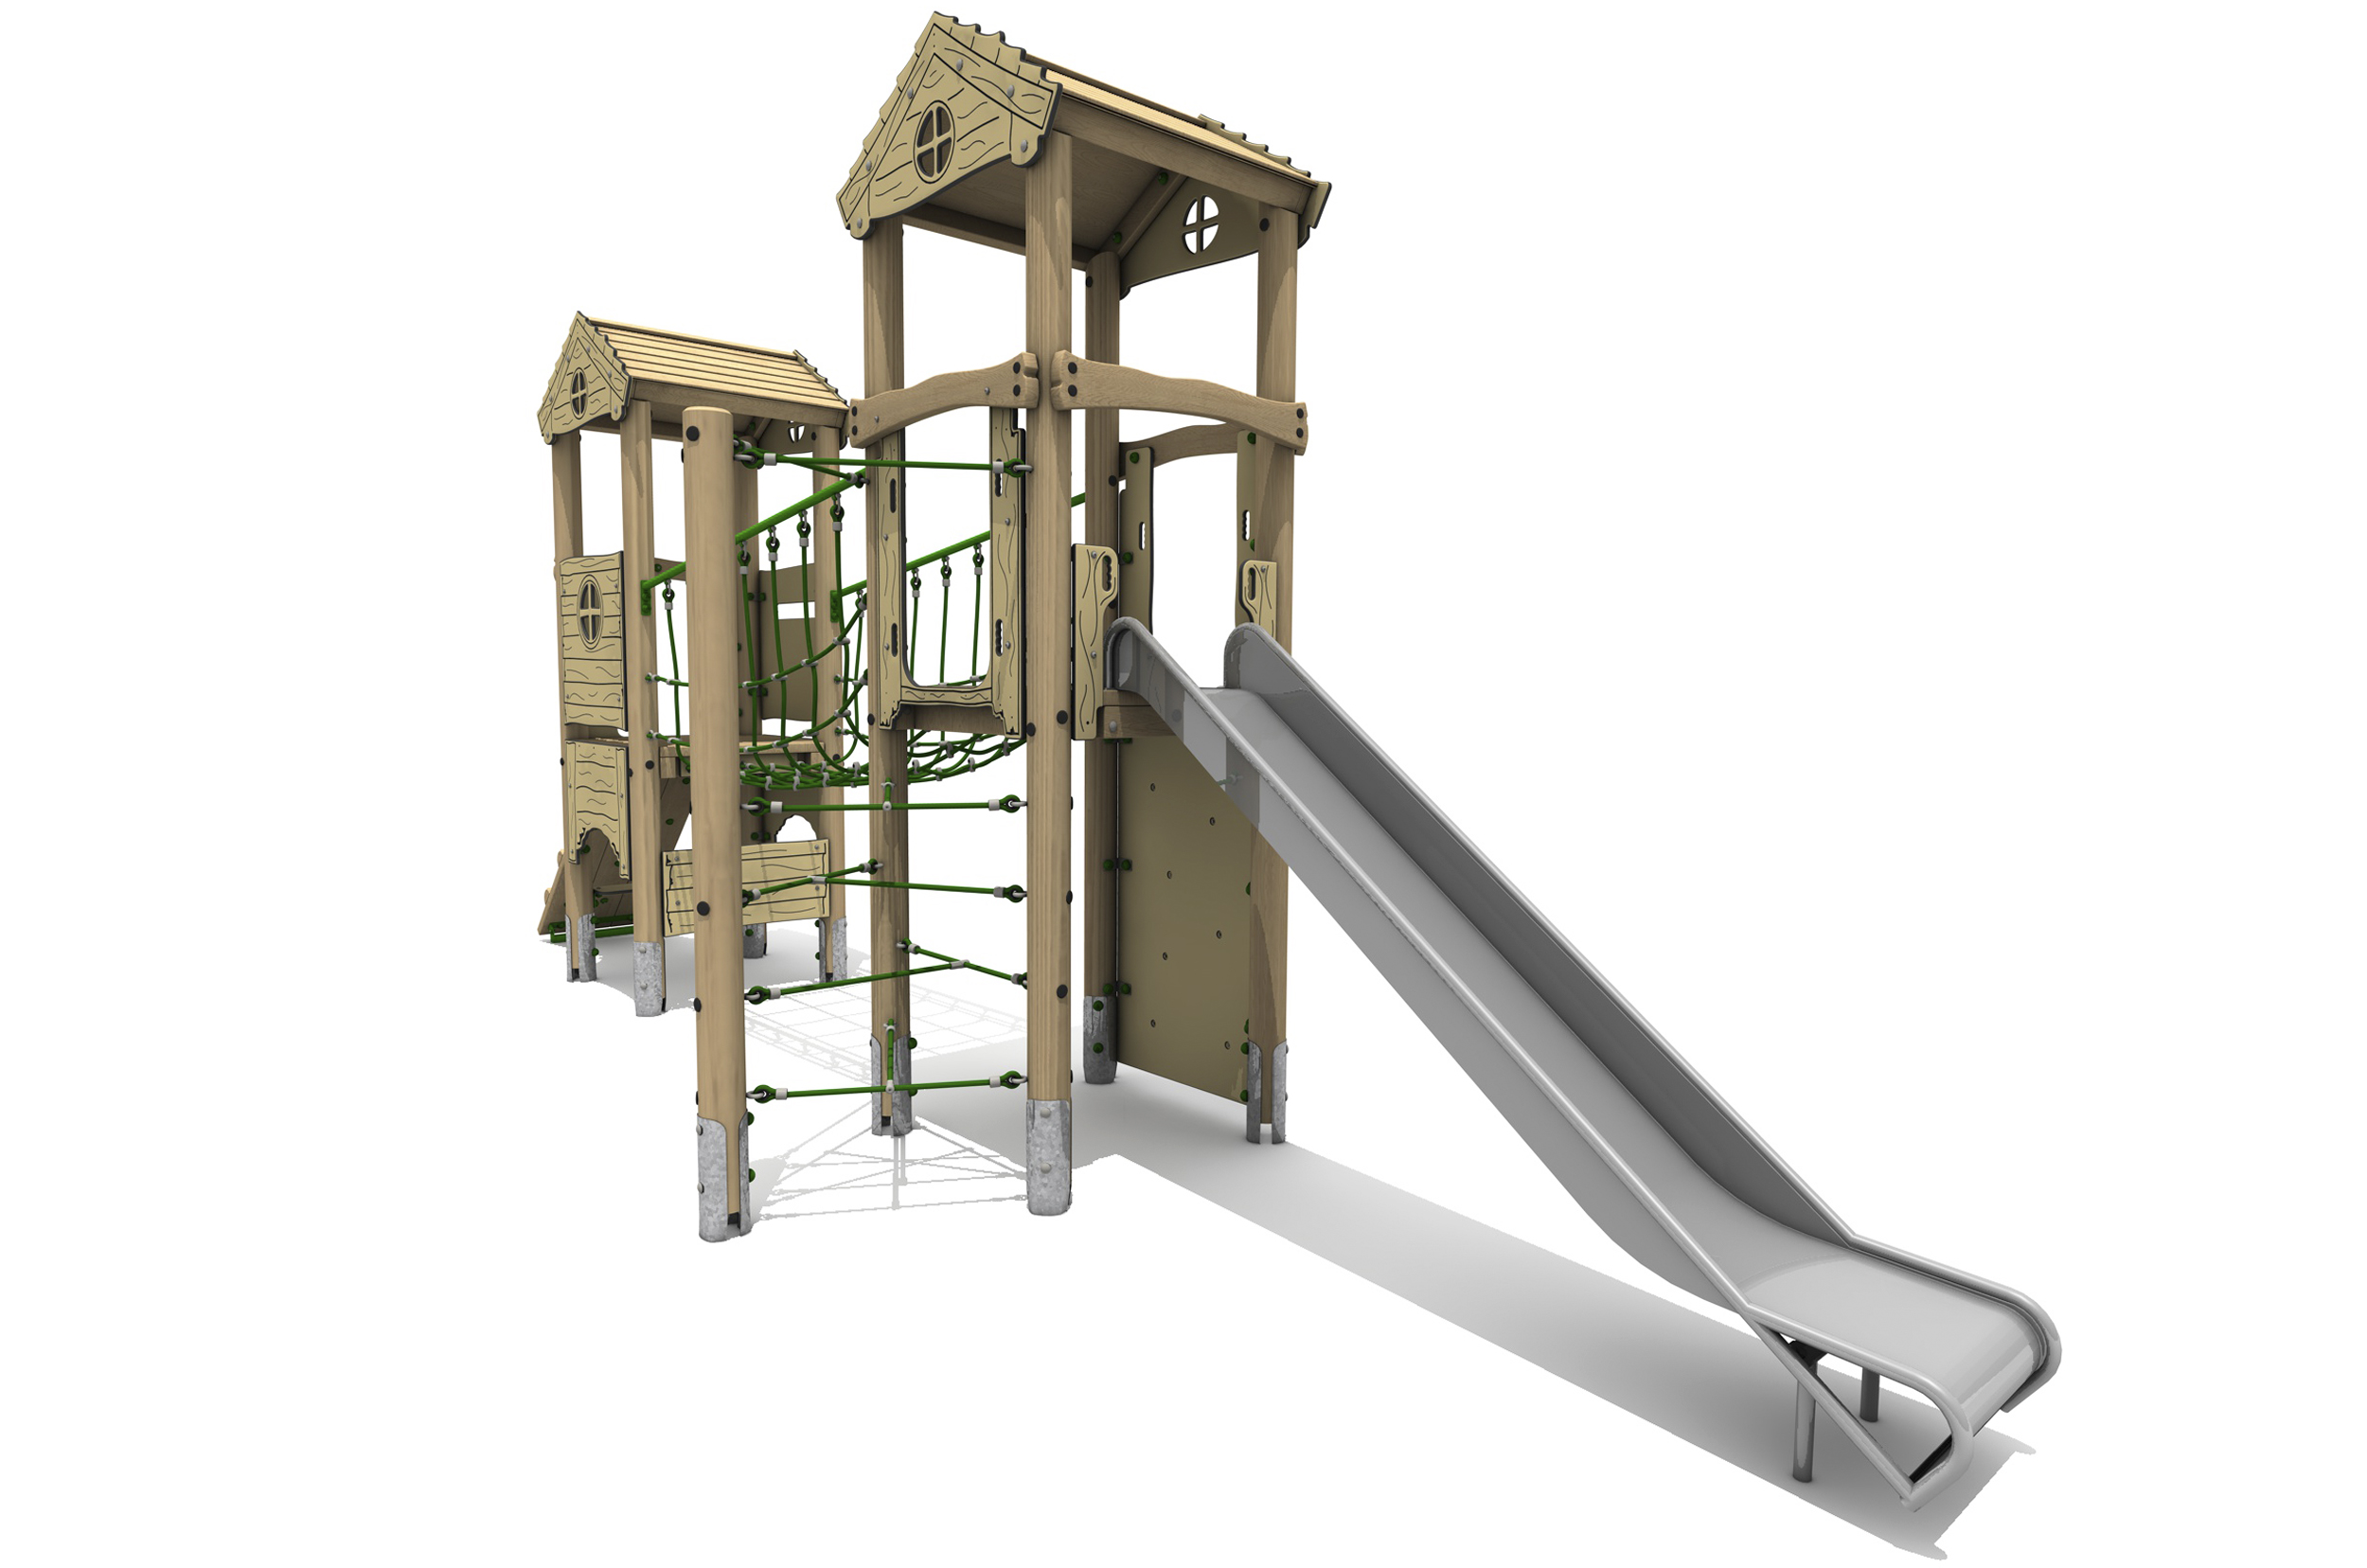 Timber Tower Double Deck 04, A timber tower climber with steel slide at the front, a green T-Rope net climber to the left, deck tower is in the background, bother platform towers have a roof atop them.